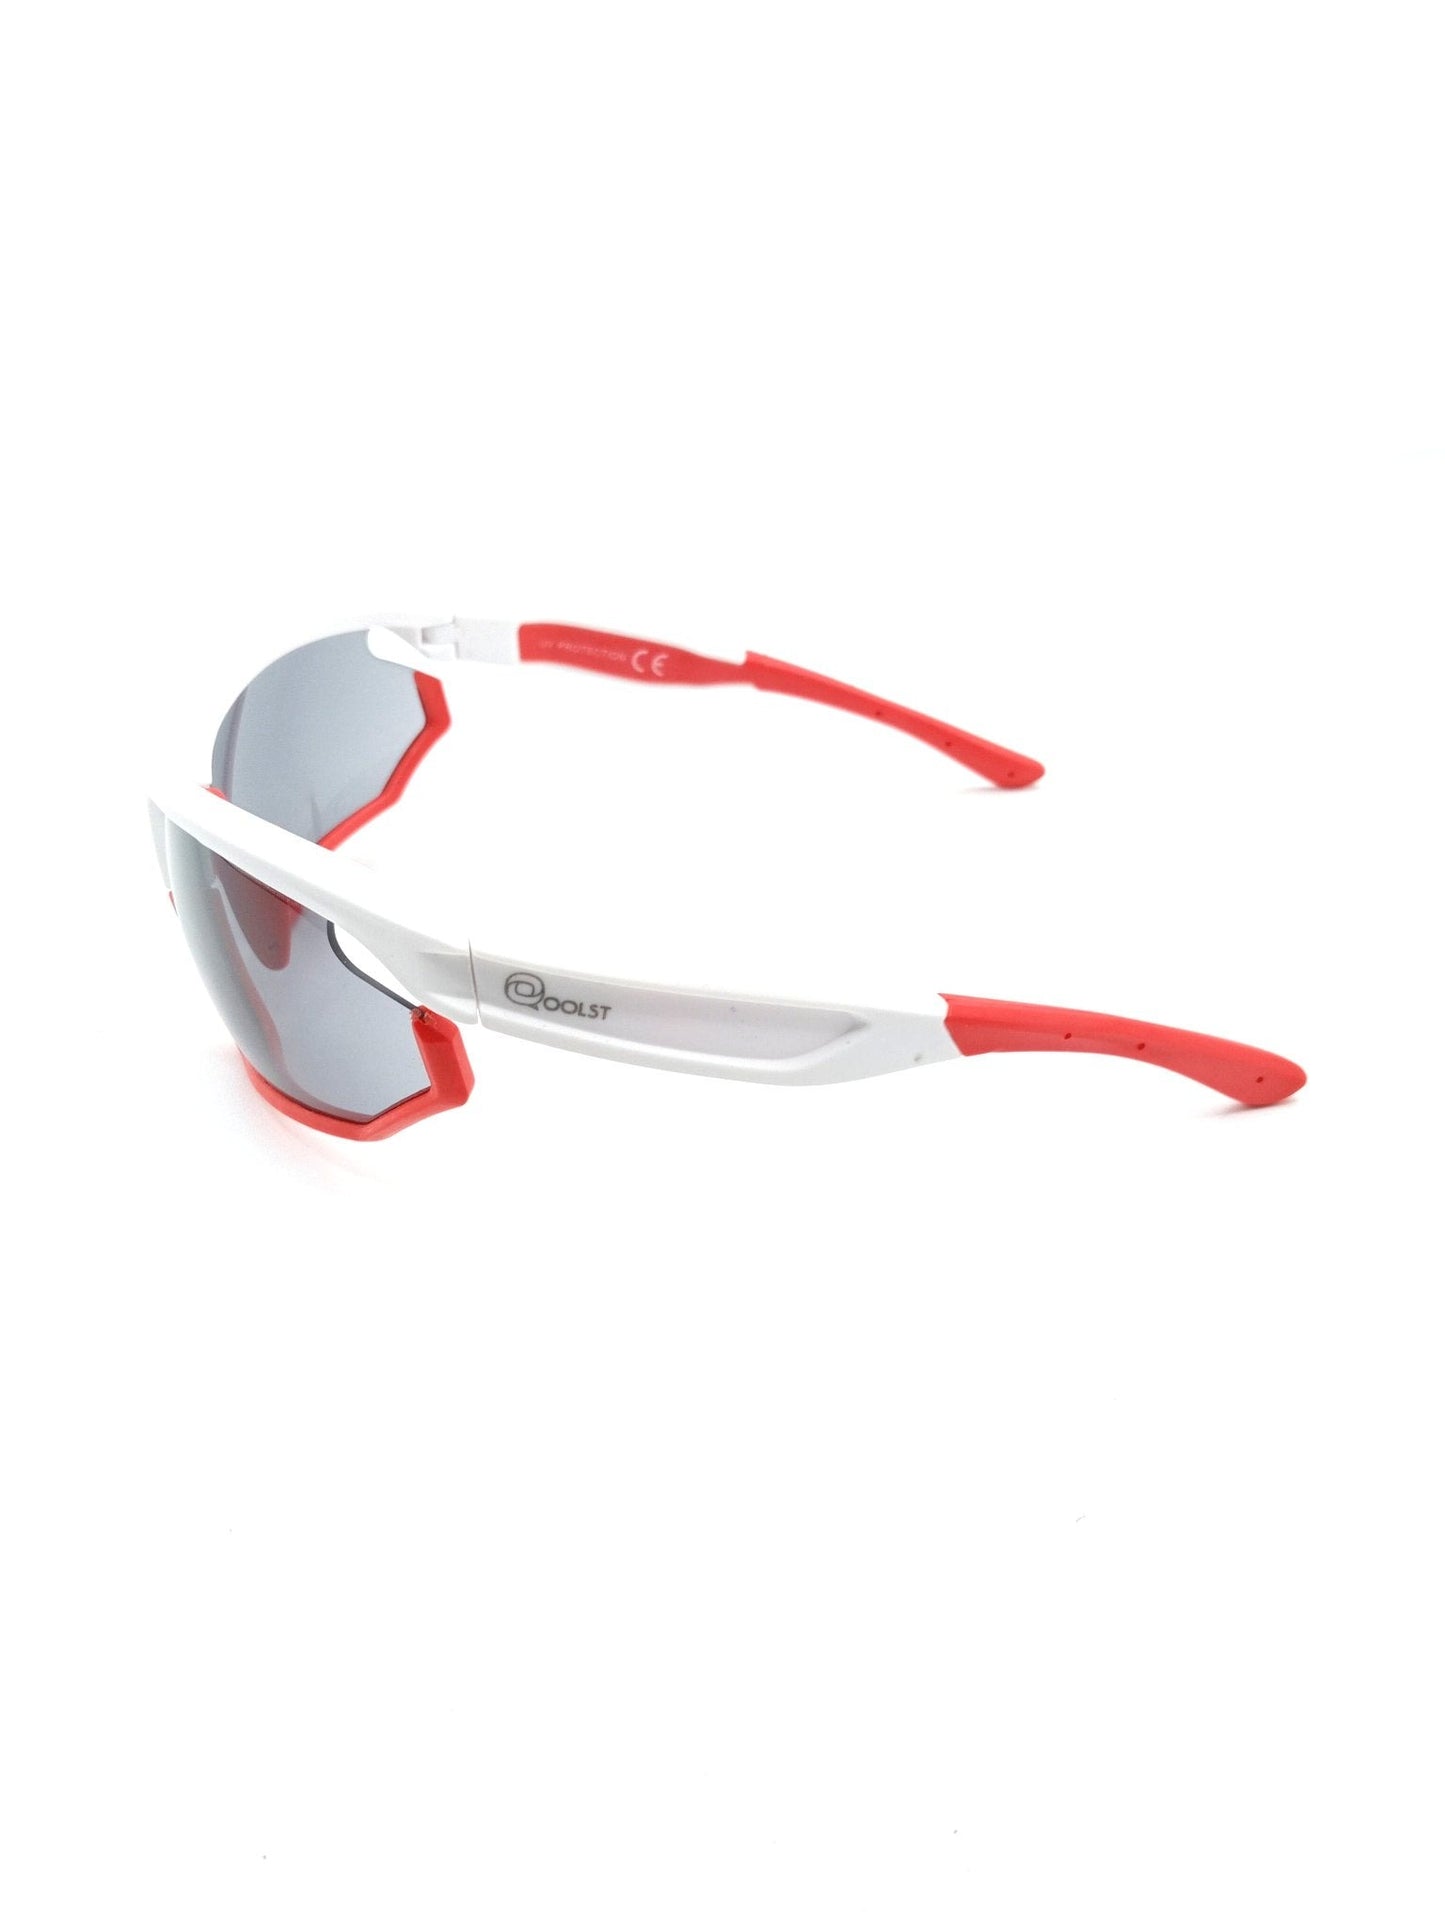 Sunglasses for men and women sports and cycling Qoolst Sport Q